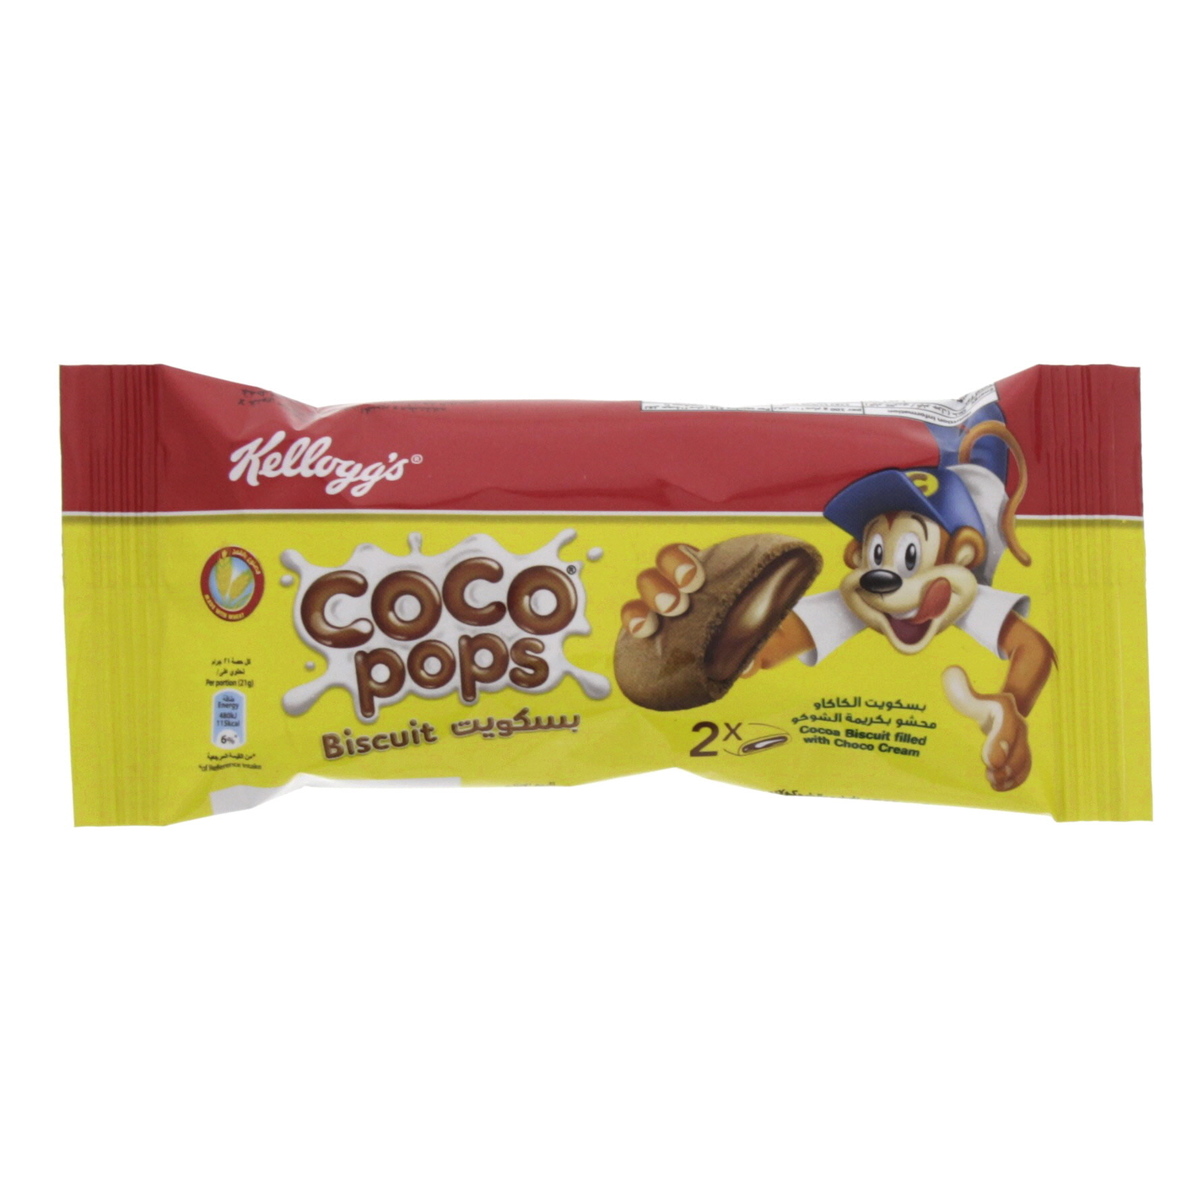 Kellogg's Coco Pops Biscuit Cocoa Biscuit Filled With Choco Cream 21g